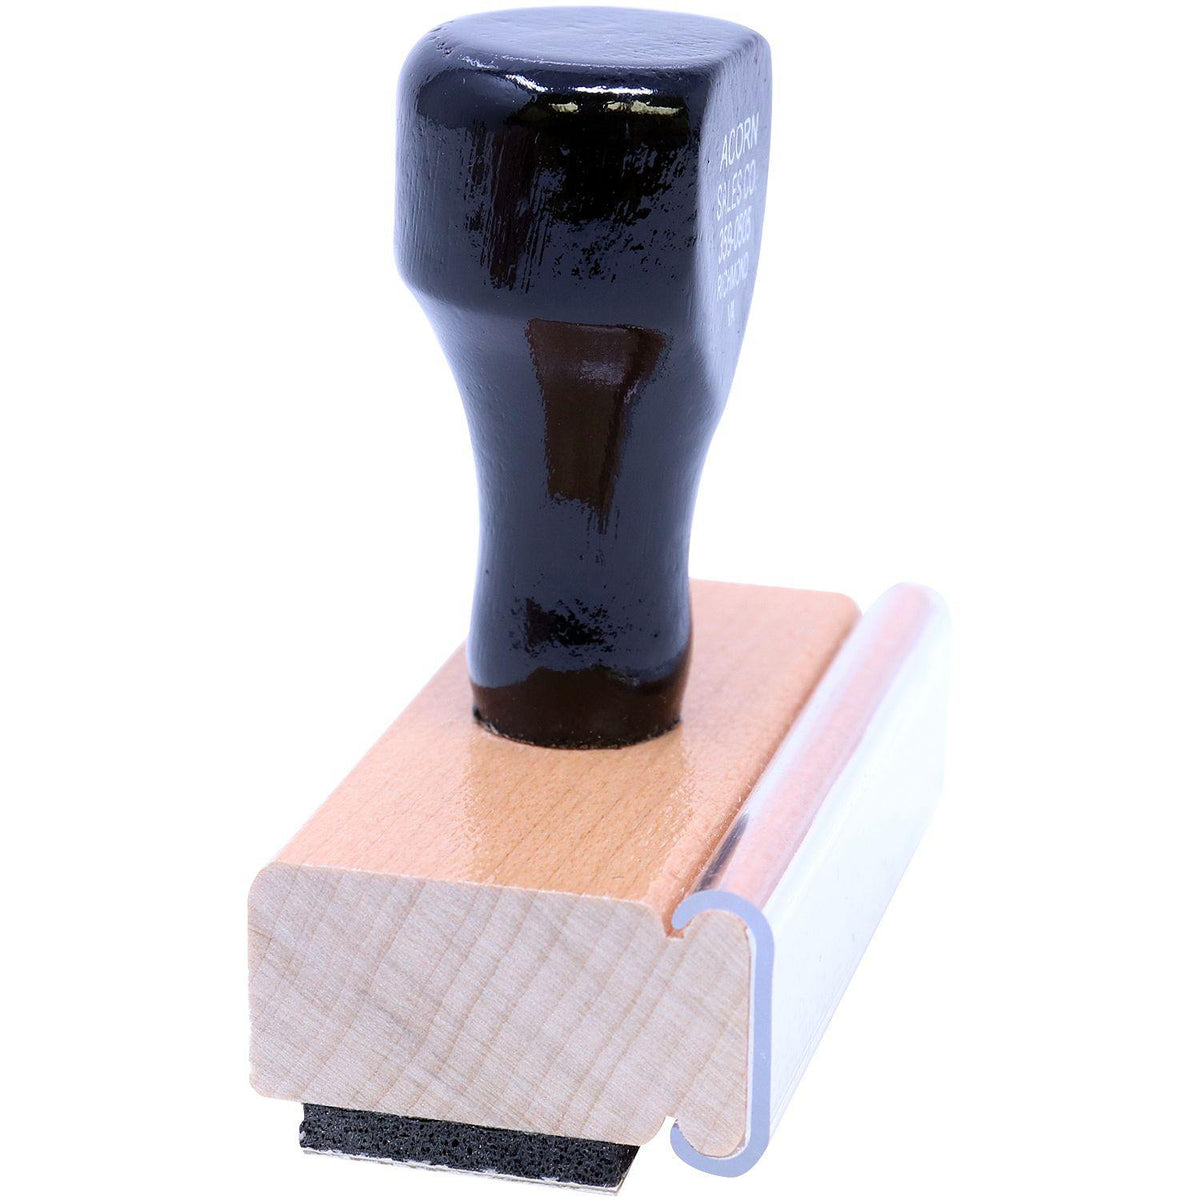 Side View of Large Outline Cancelled Rubber Stamp at an Angle